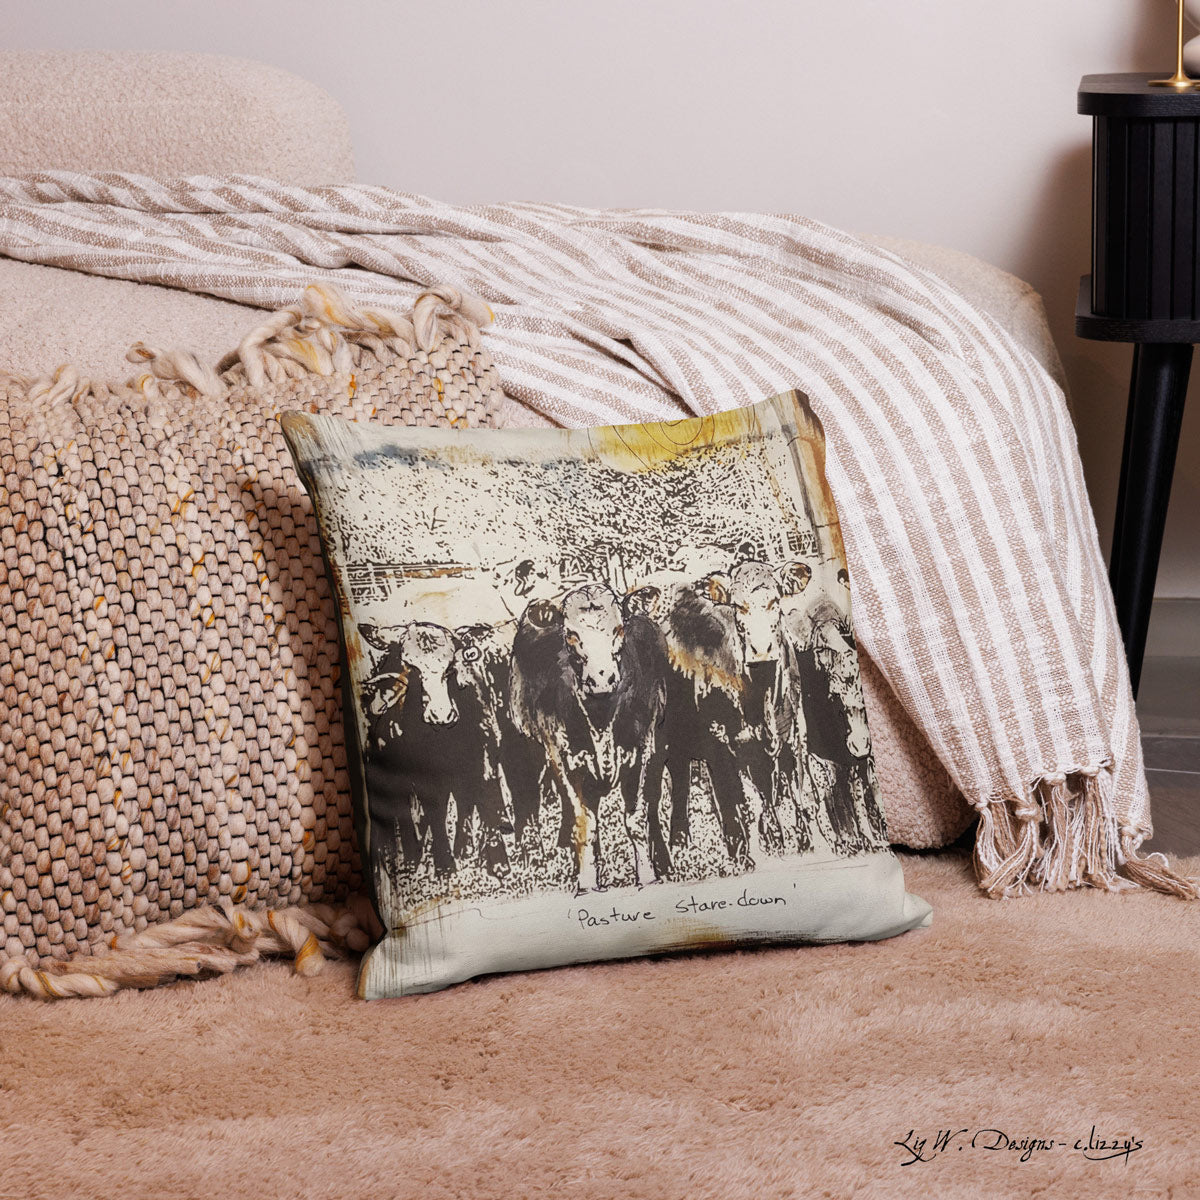 Throw pillow featuring cattle, cows, farm life and ranch life in a pasture.